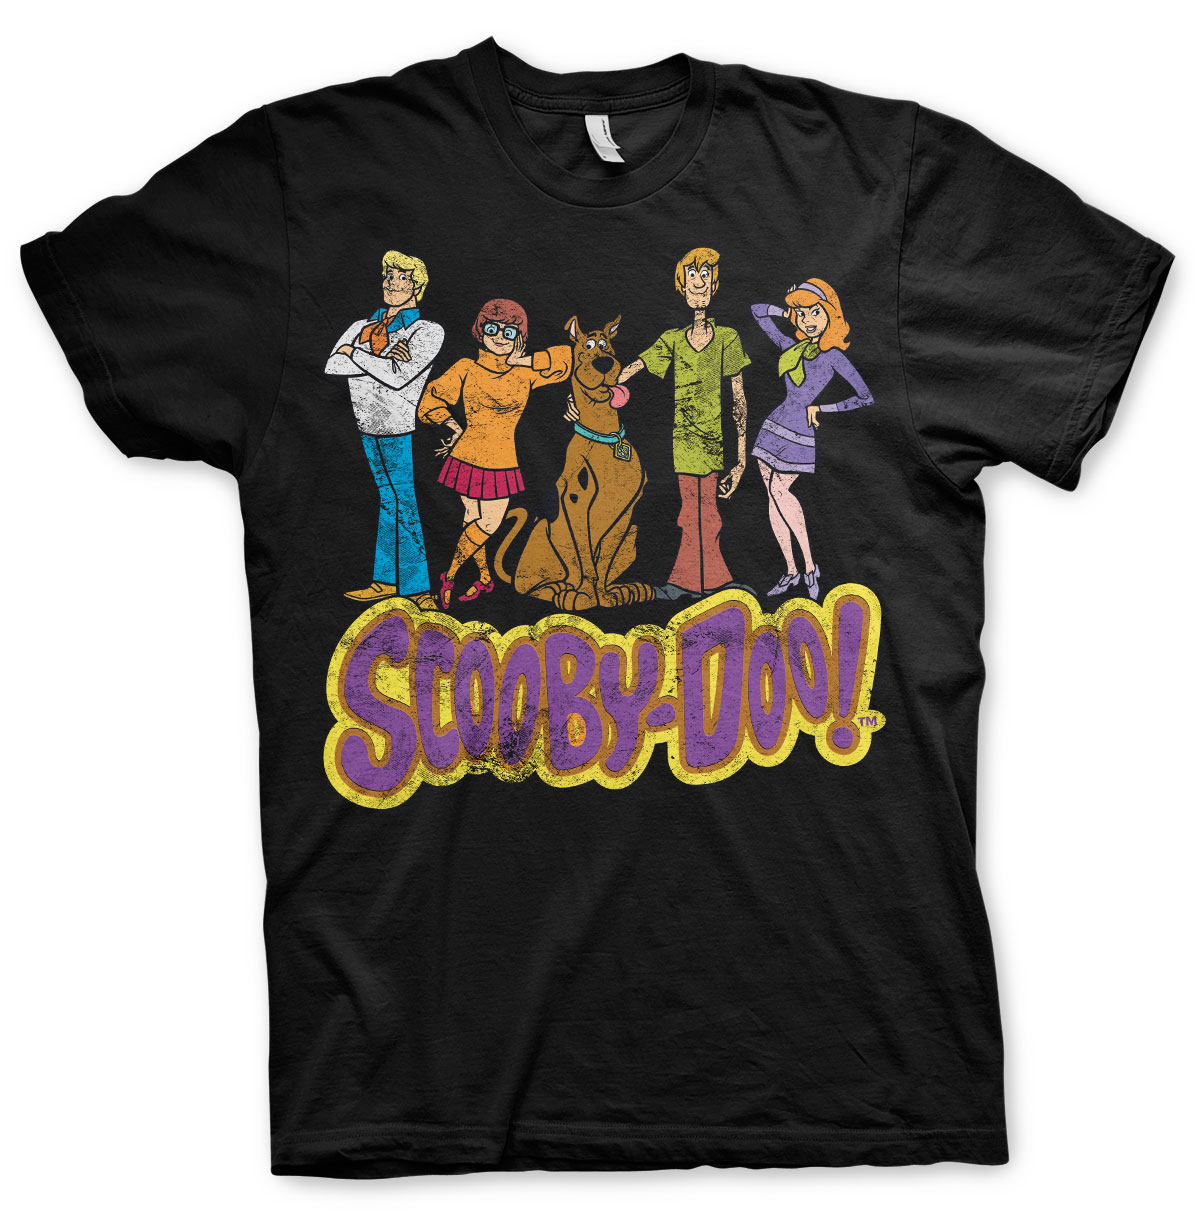 Team Scooby Doo Distressed T-Shirt